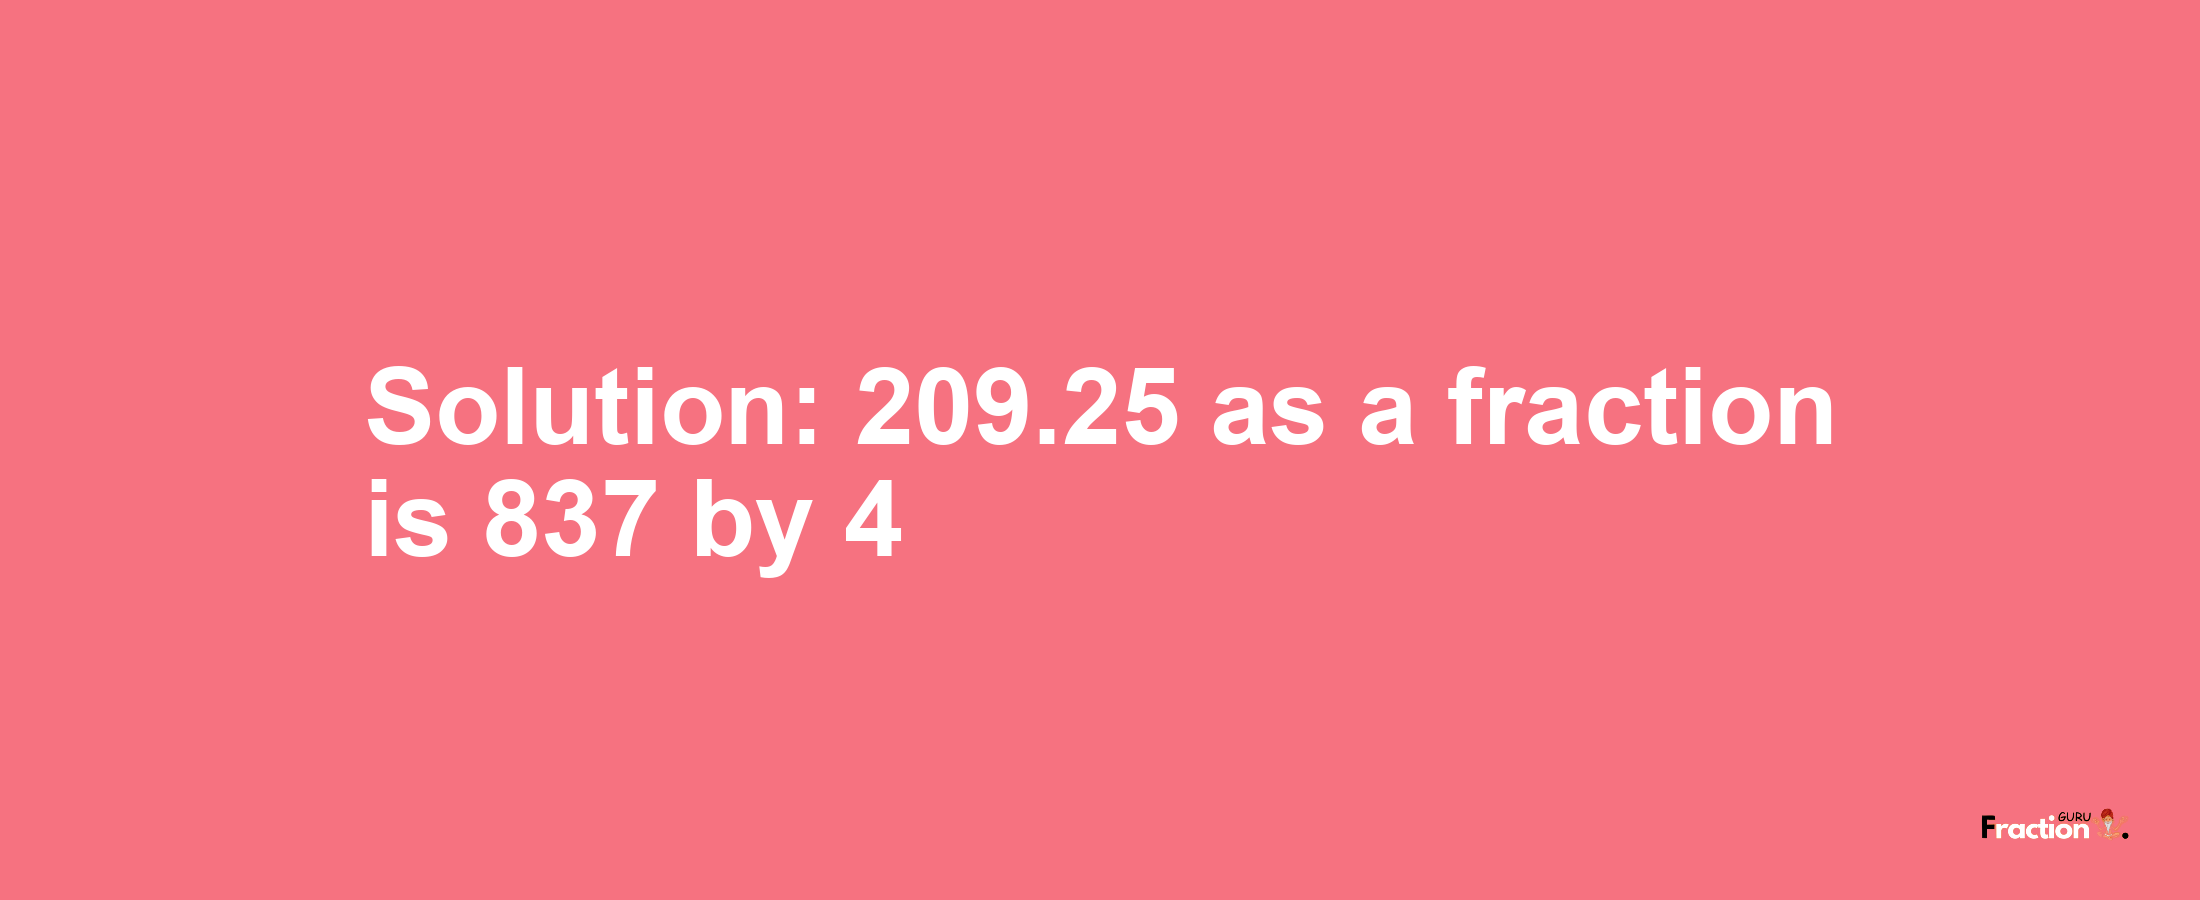 Solution:209.25 as a fraction is 837/4